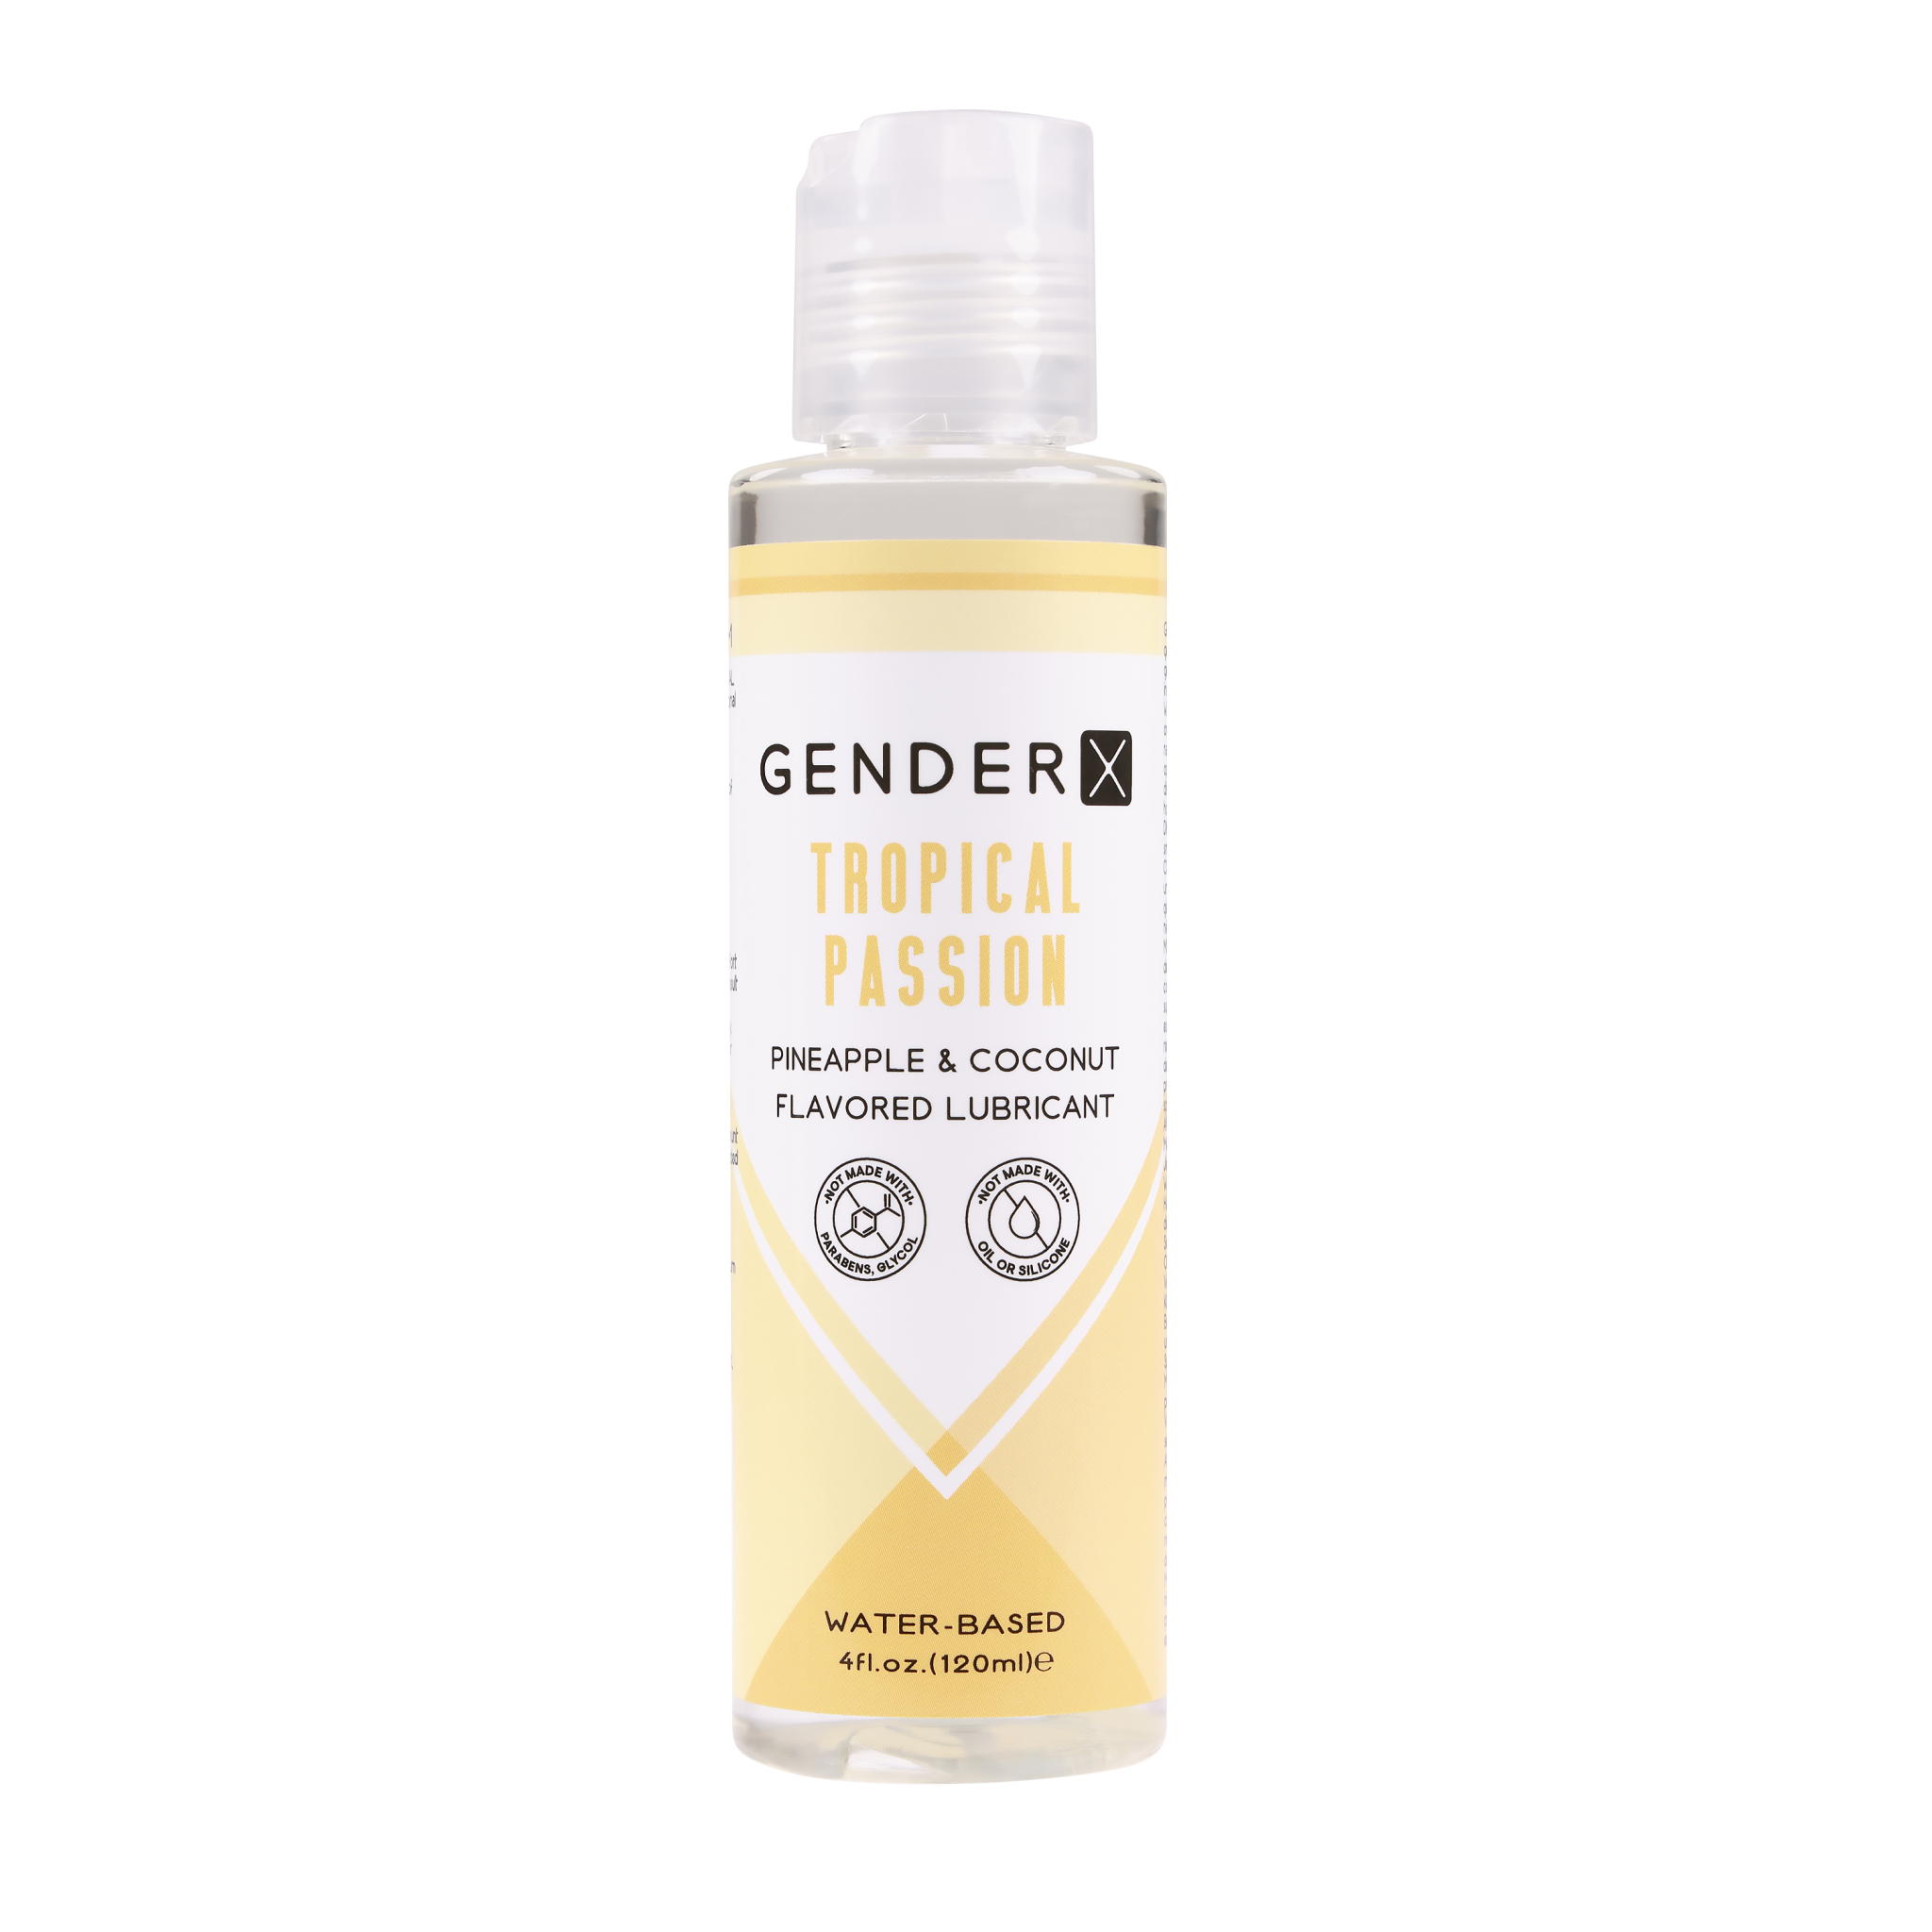 GENDER X TROPICAL PASSION LUBE FLAVORED 4 OZ 